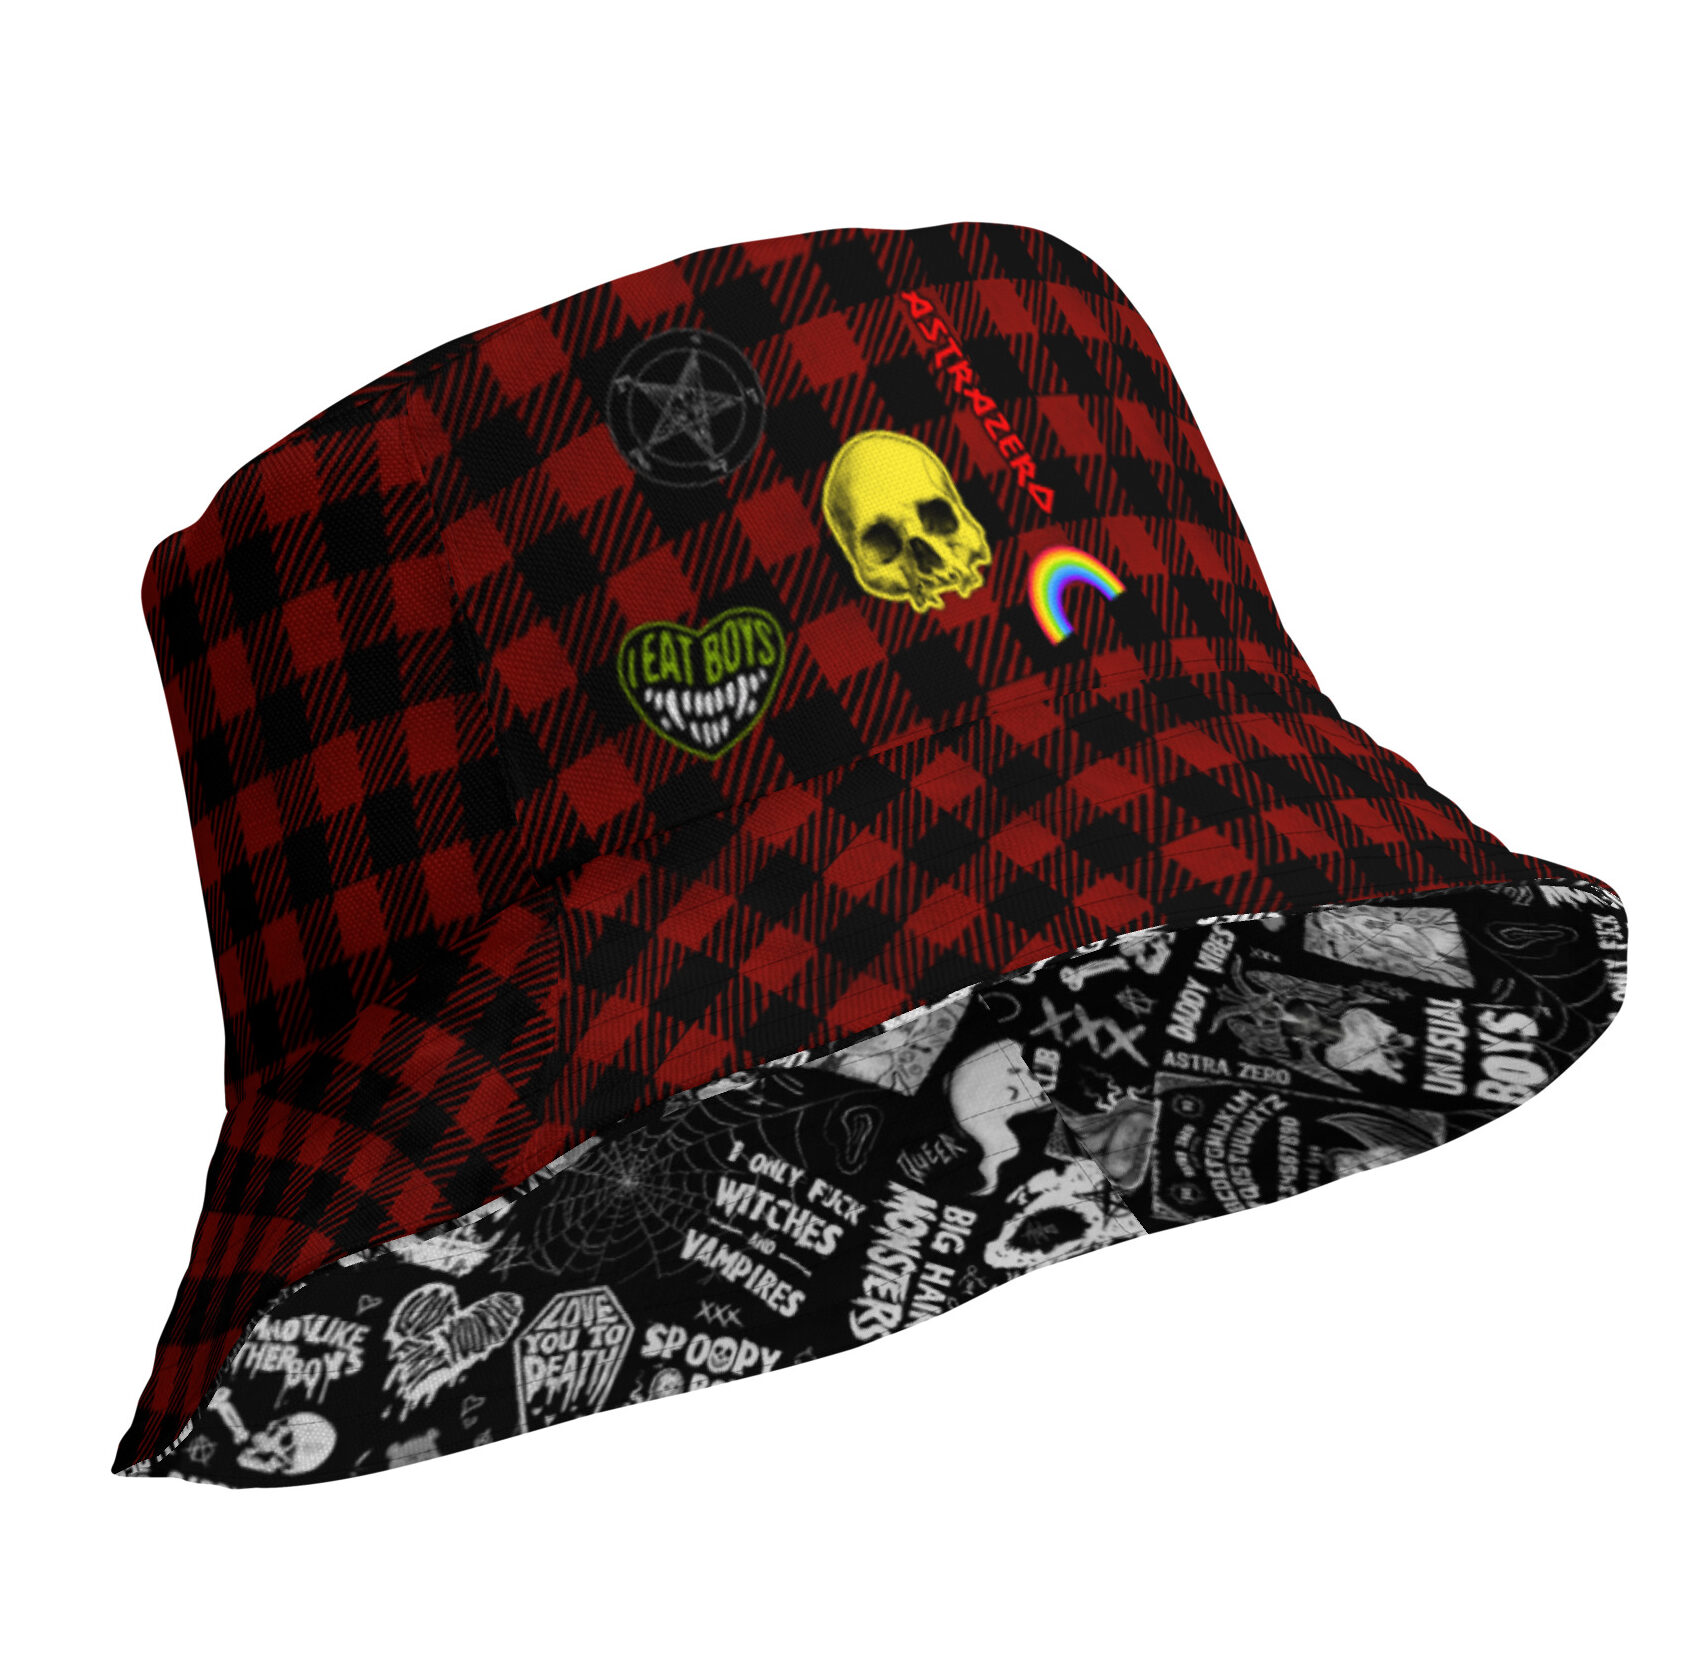 Featured image for “Gay Punk - Reversible bucket hat”